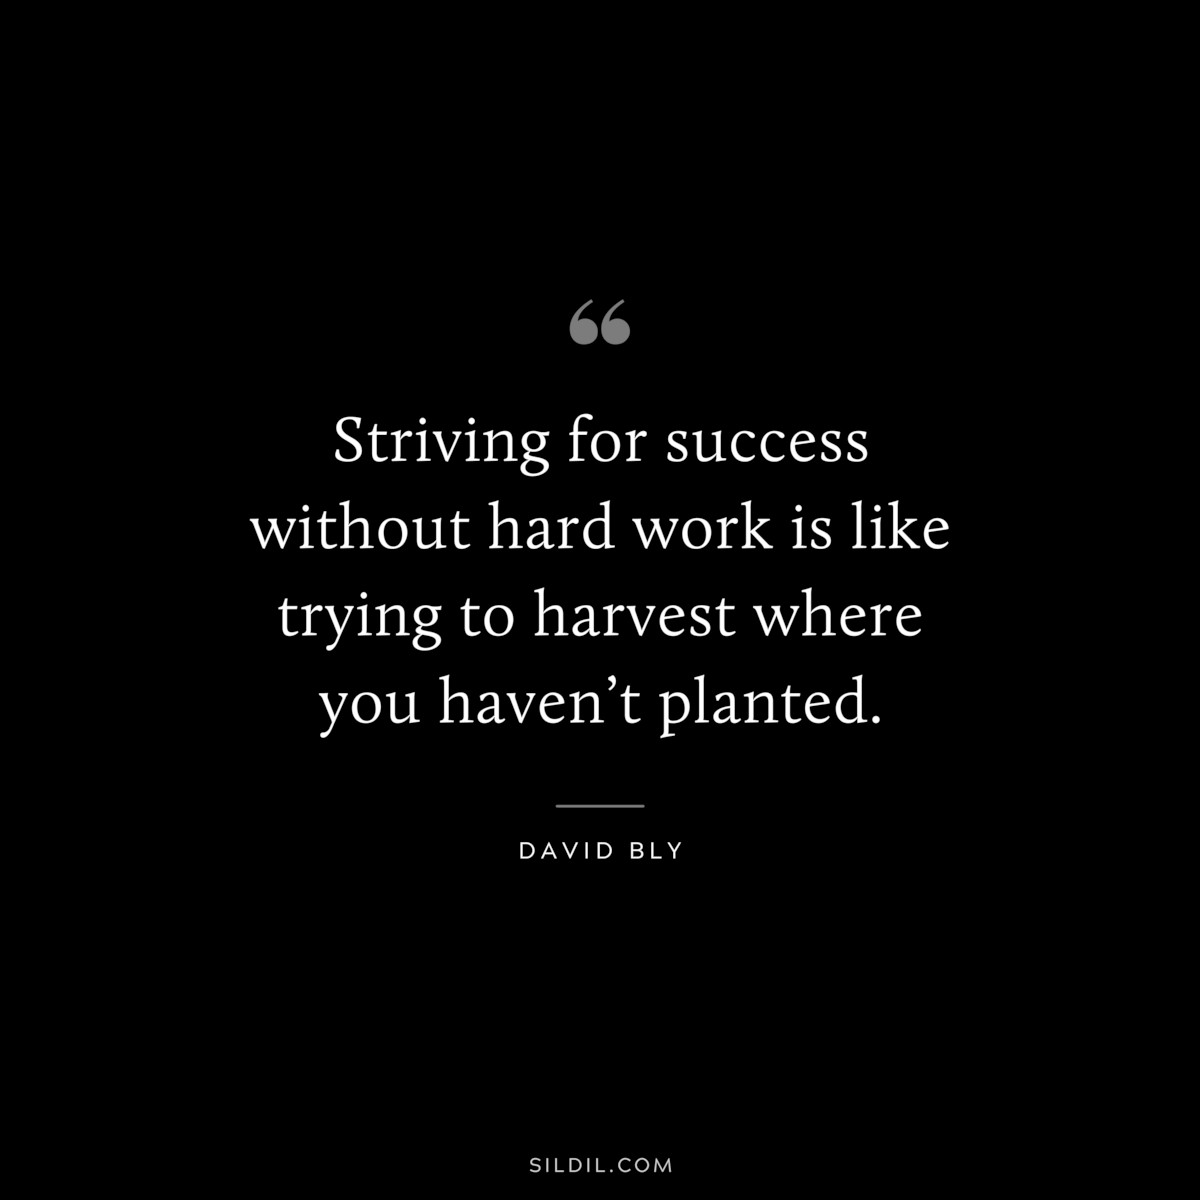 Striving for success without hard work is like trying to harvest where you haven’t planted. ― David Bly